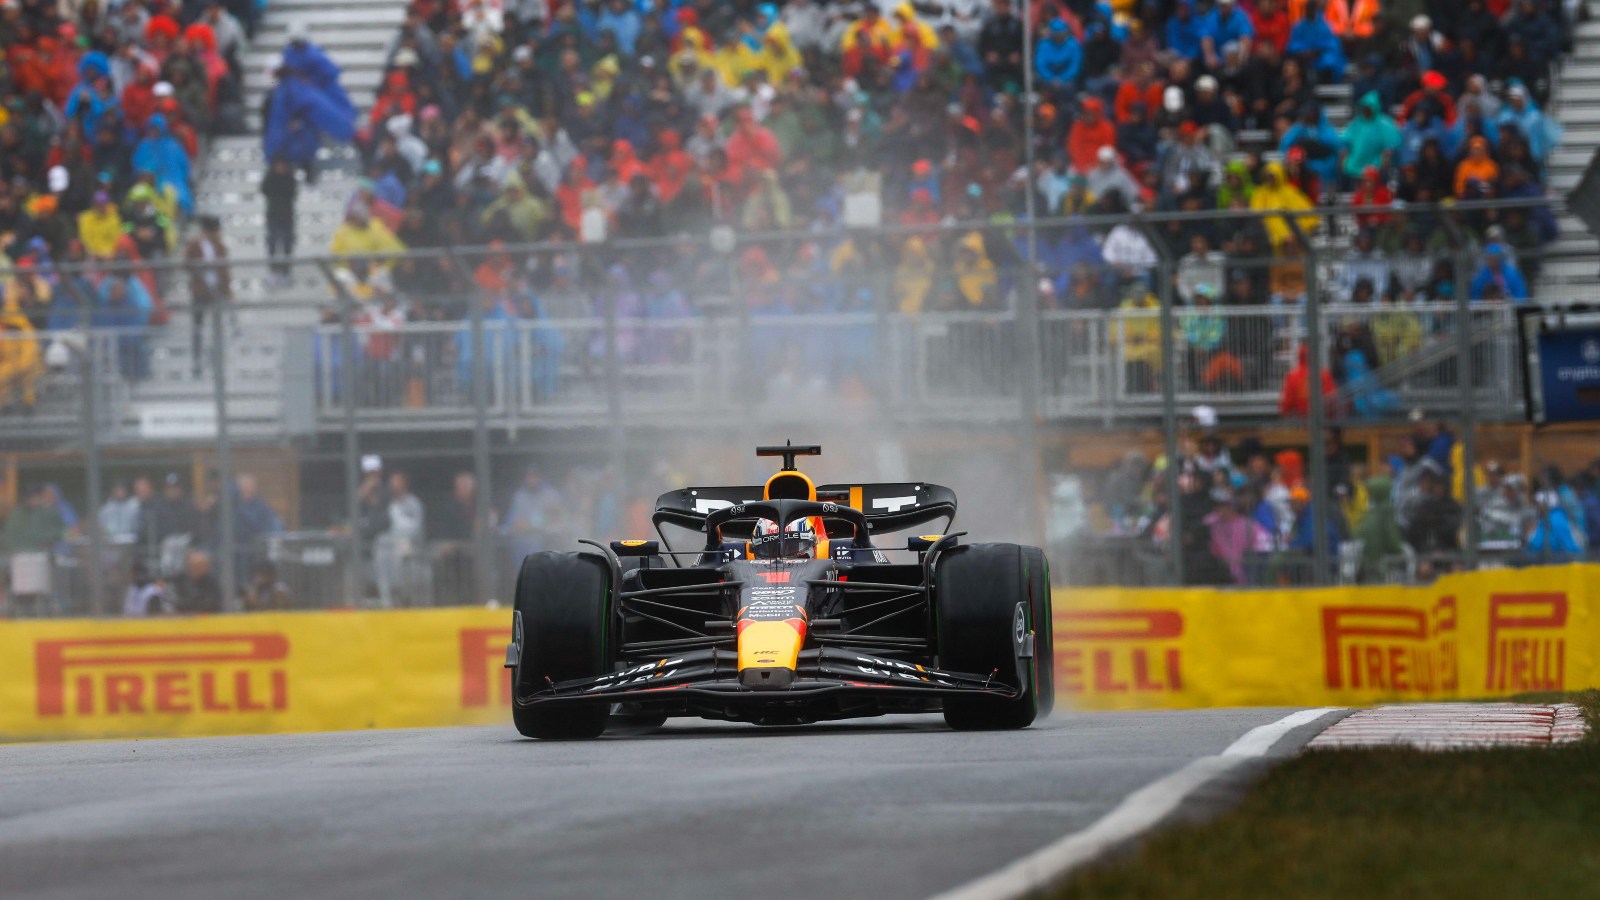 Heres How To Watch 2023 Canadian Grand Prix Live (FREE) Streaming At Reddit